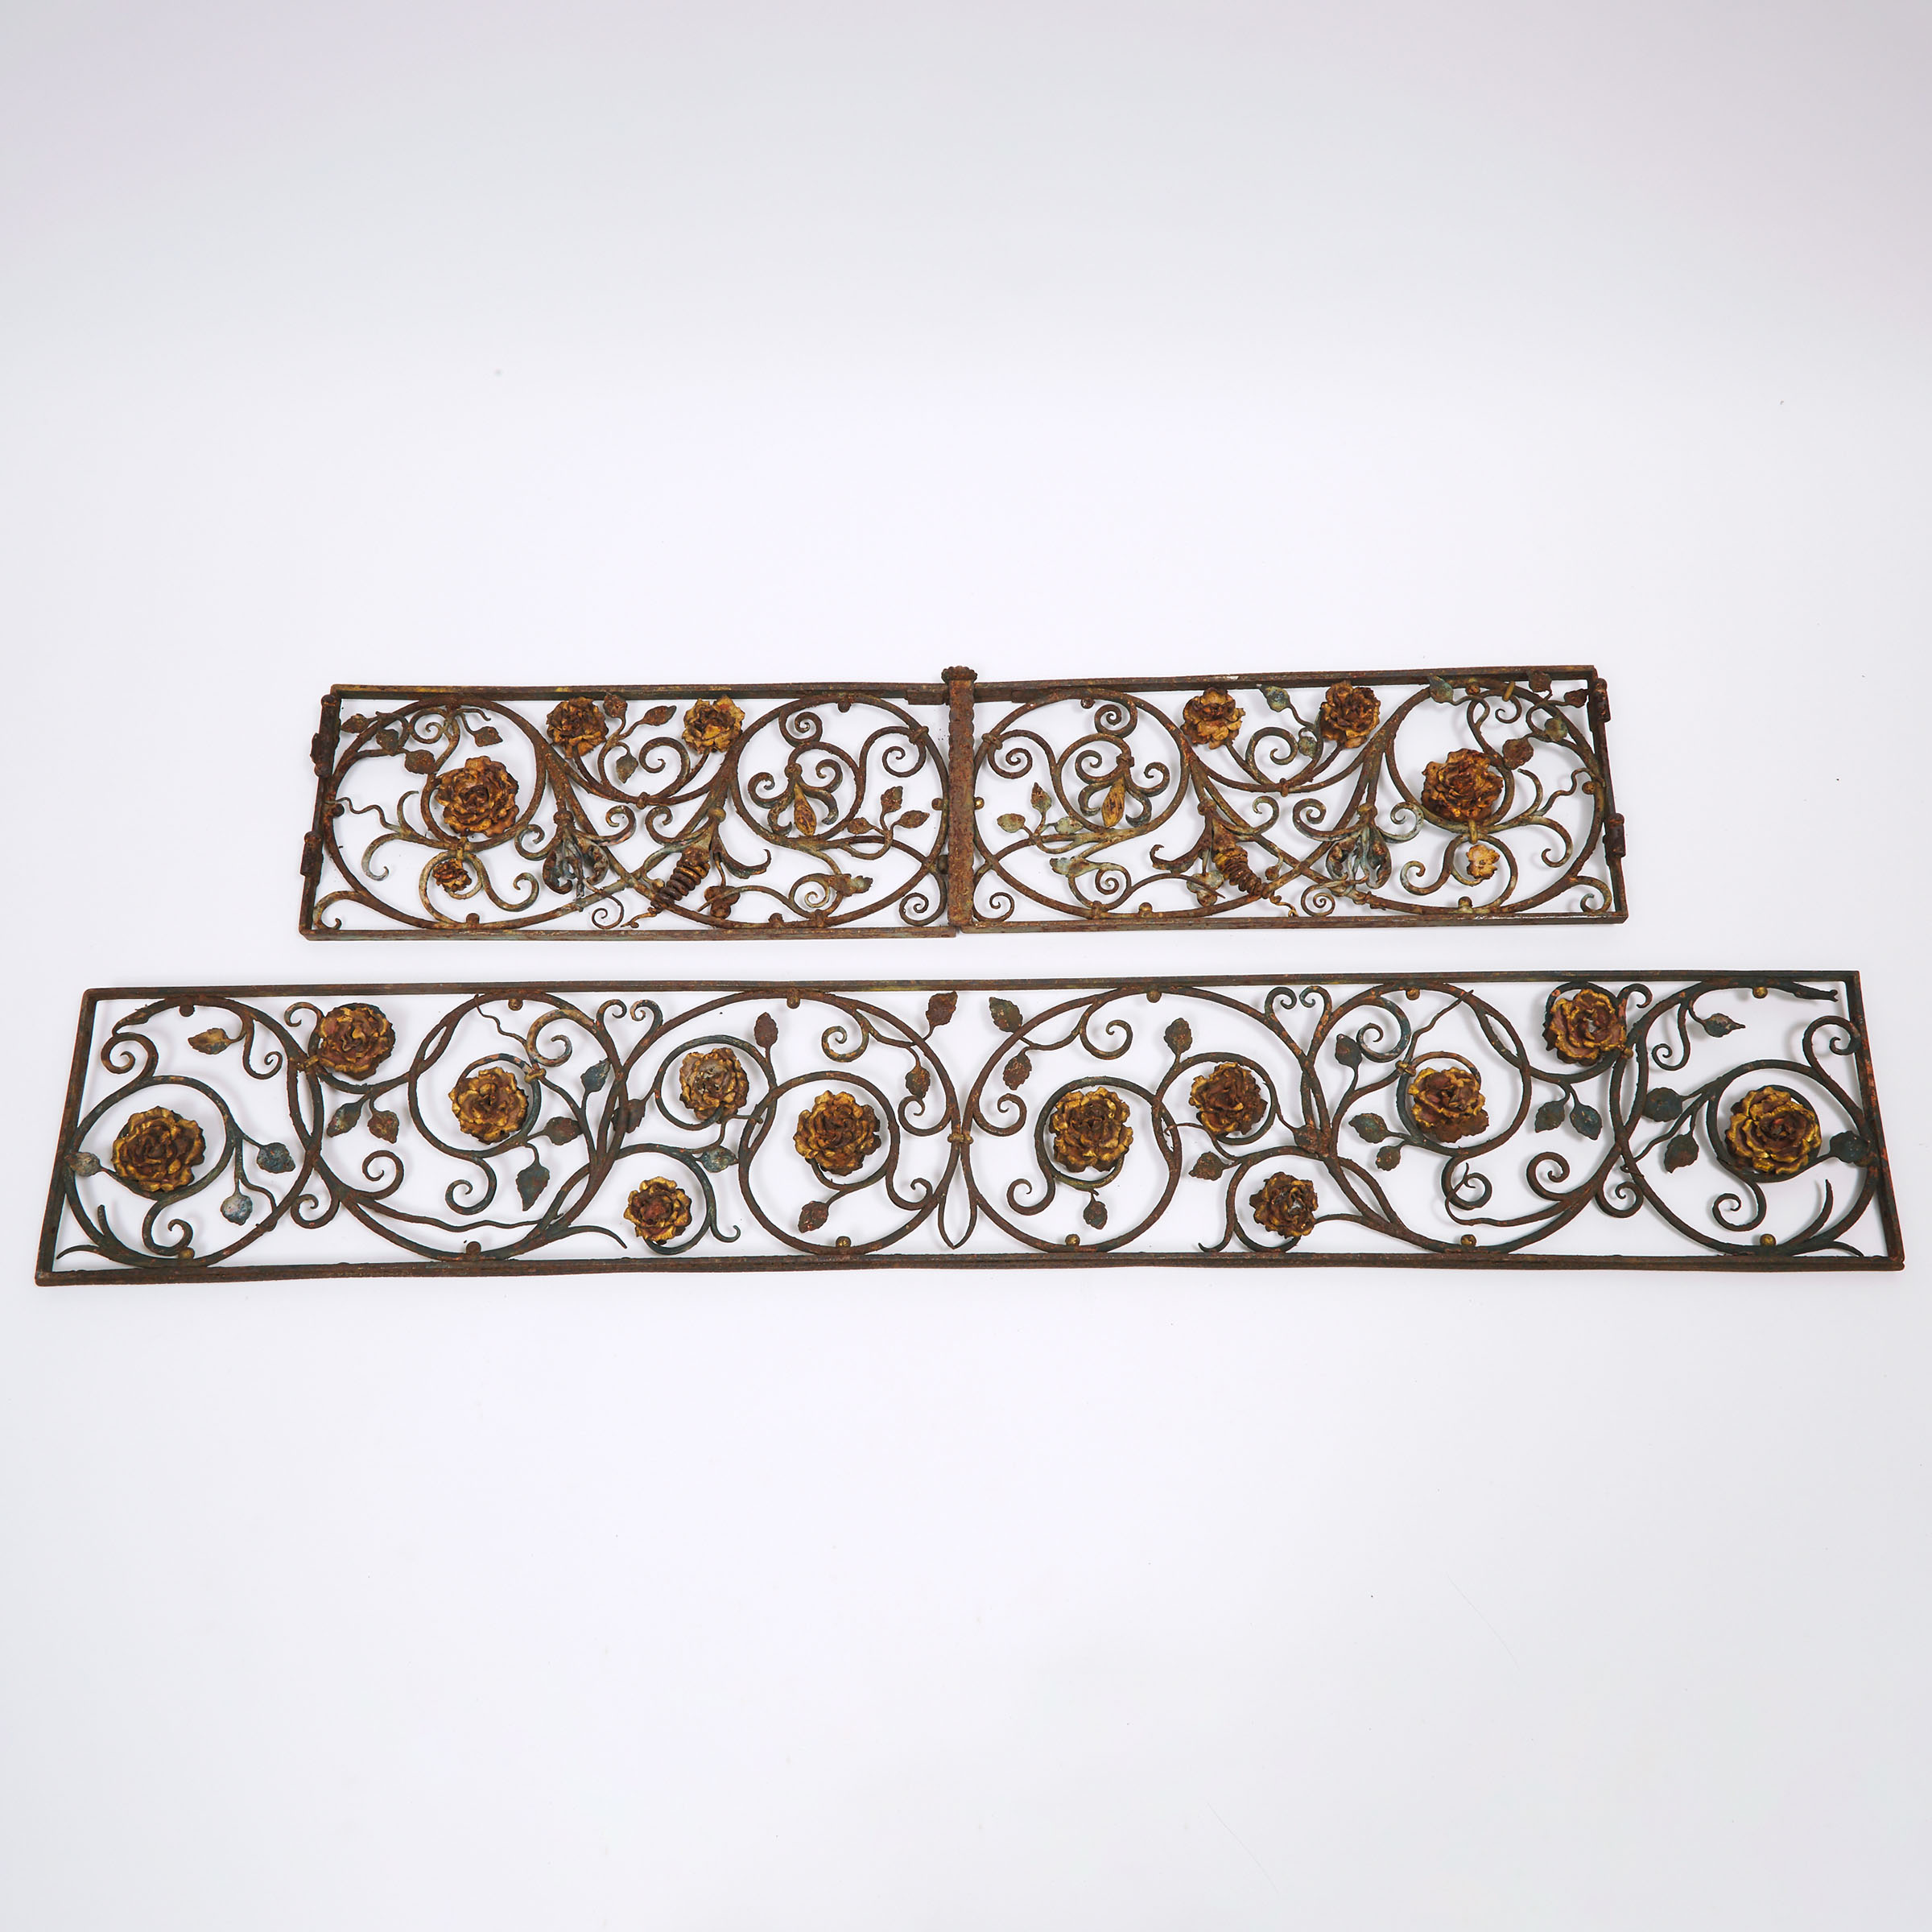 Two Painted Wrought Iron Window Grates, c.1900